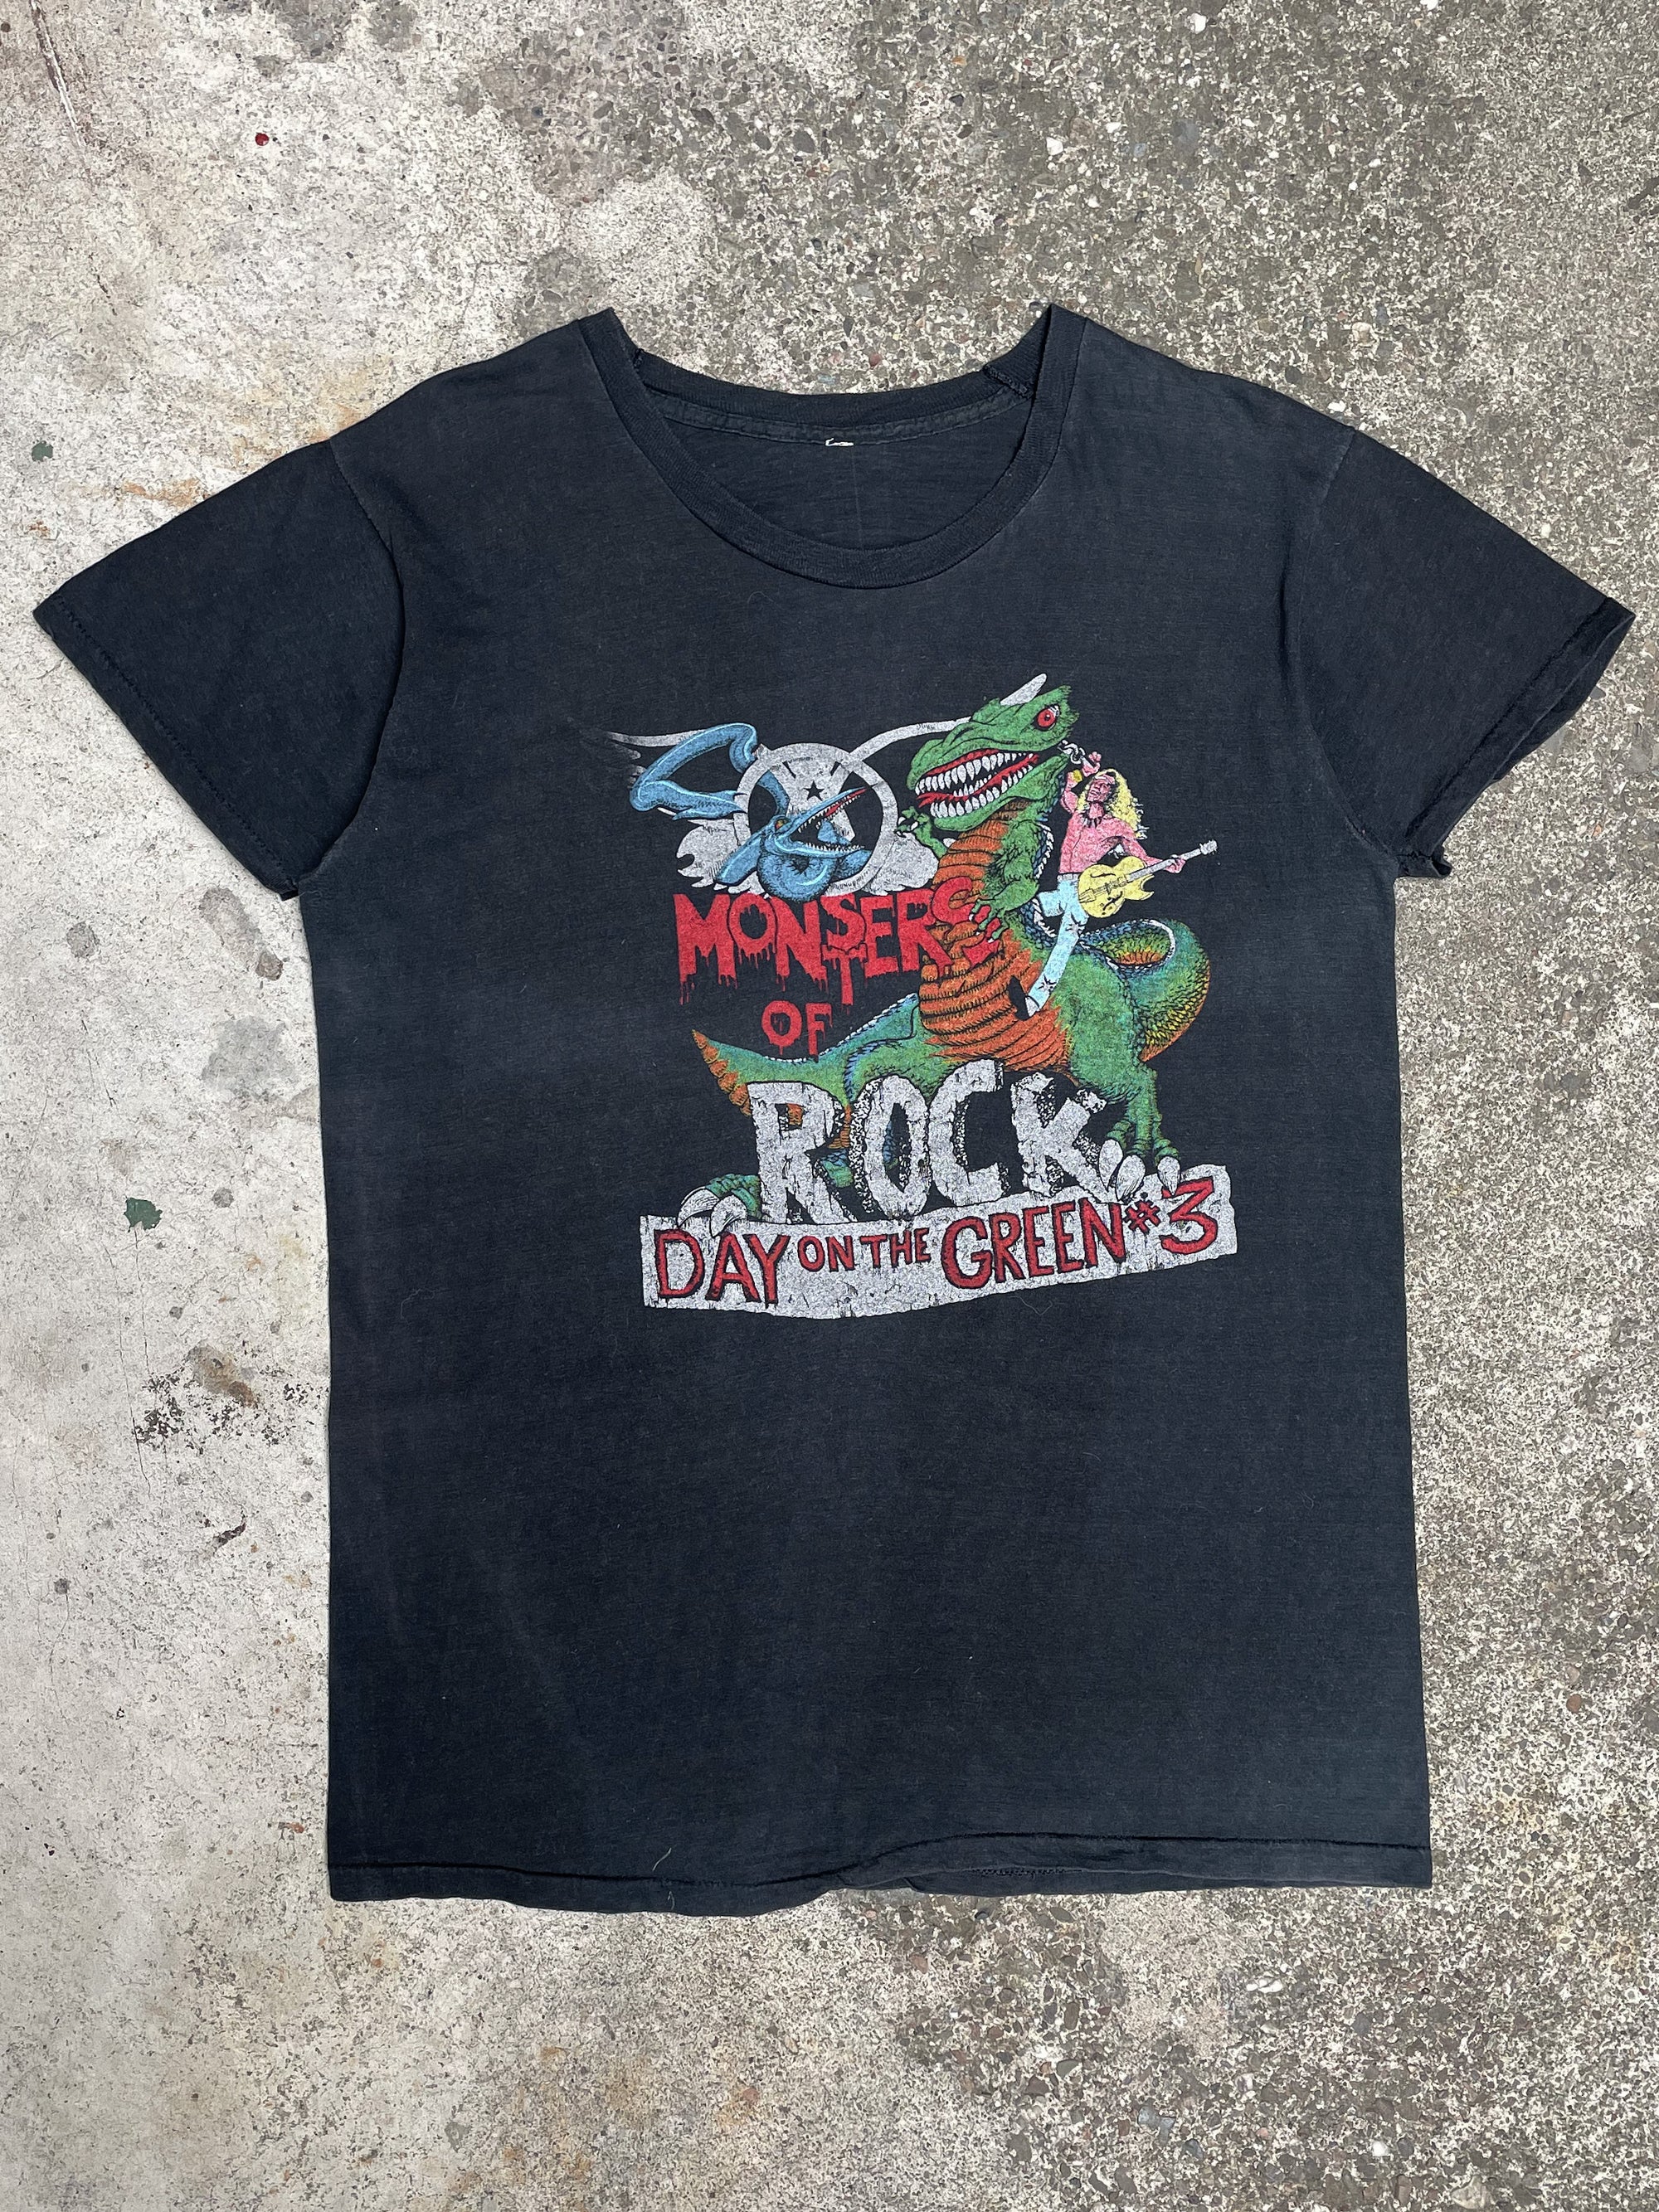 1979 Monsters of Rock “Day On The Green” Band Tee (M)